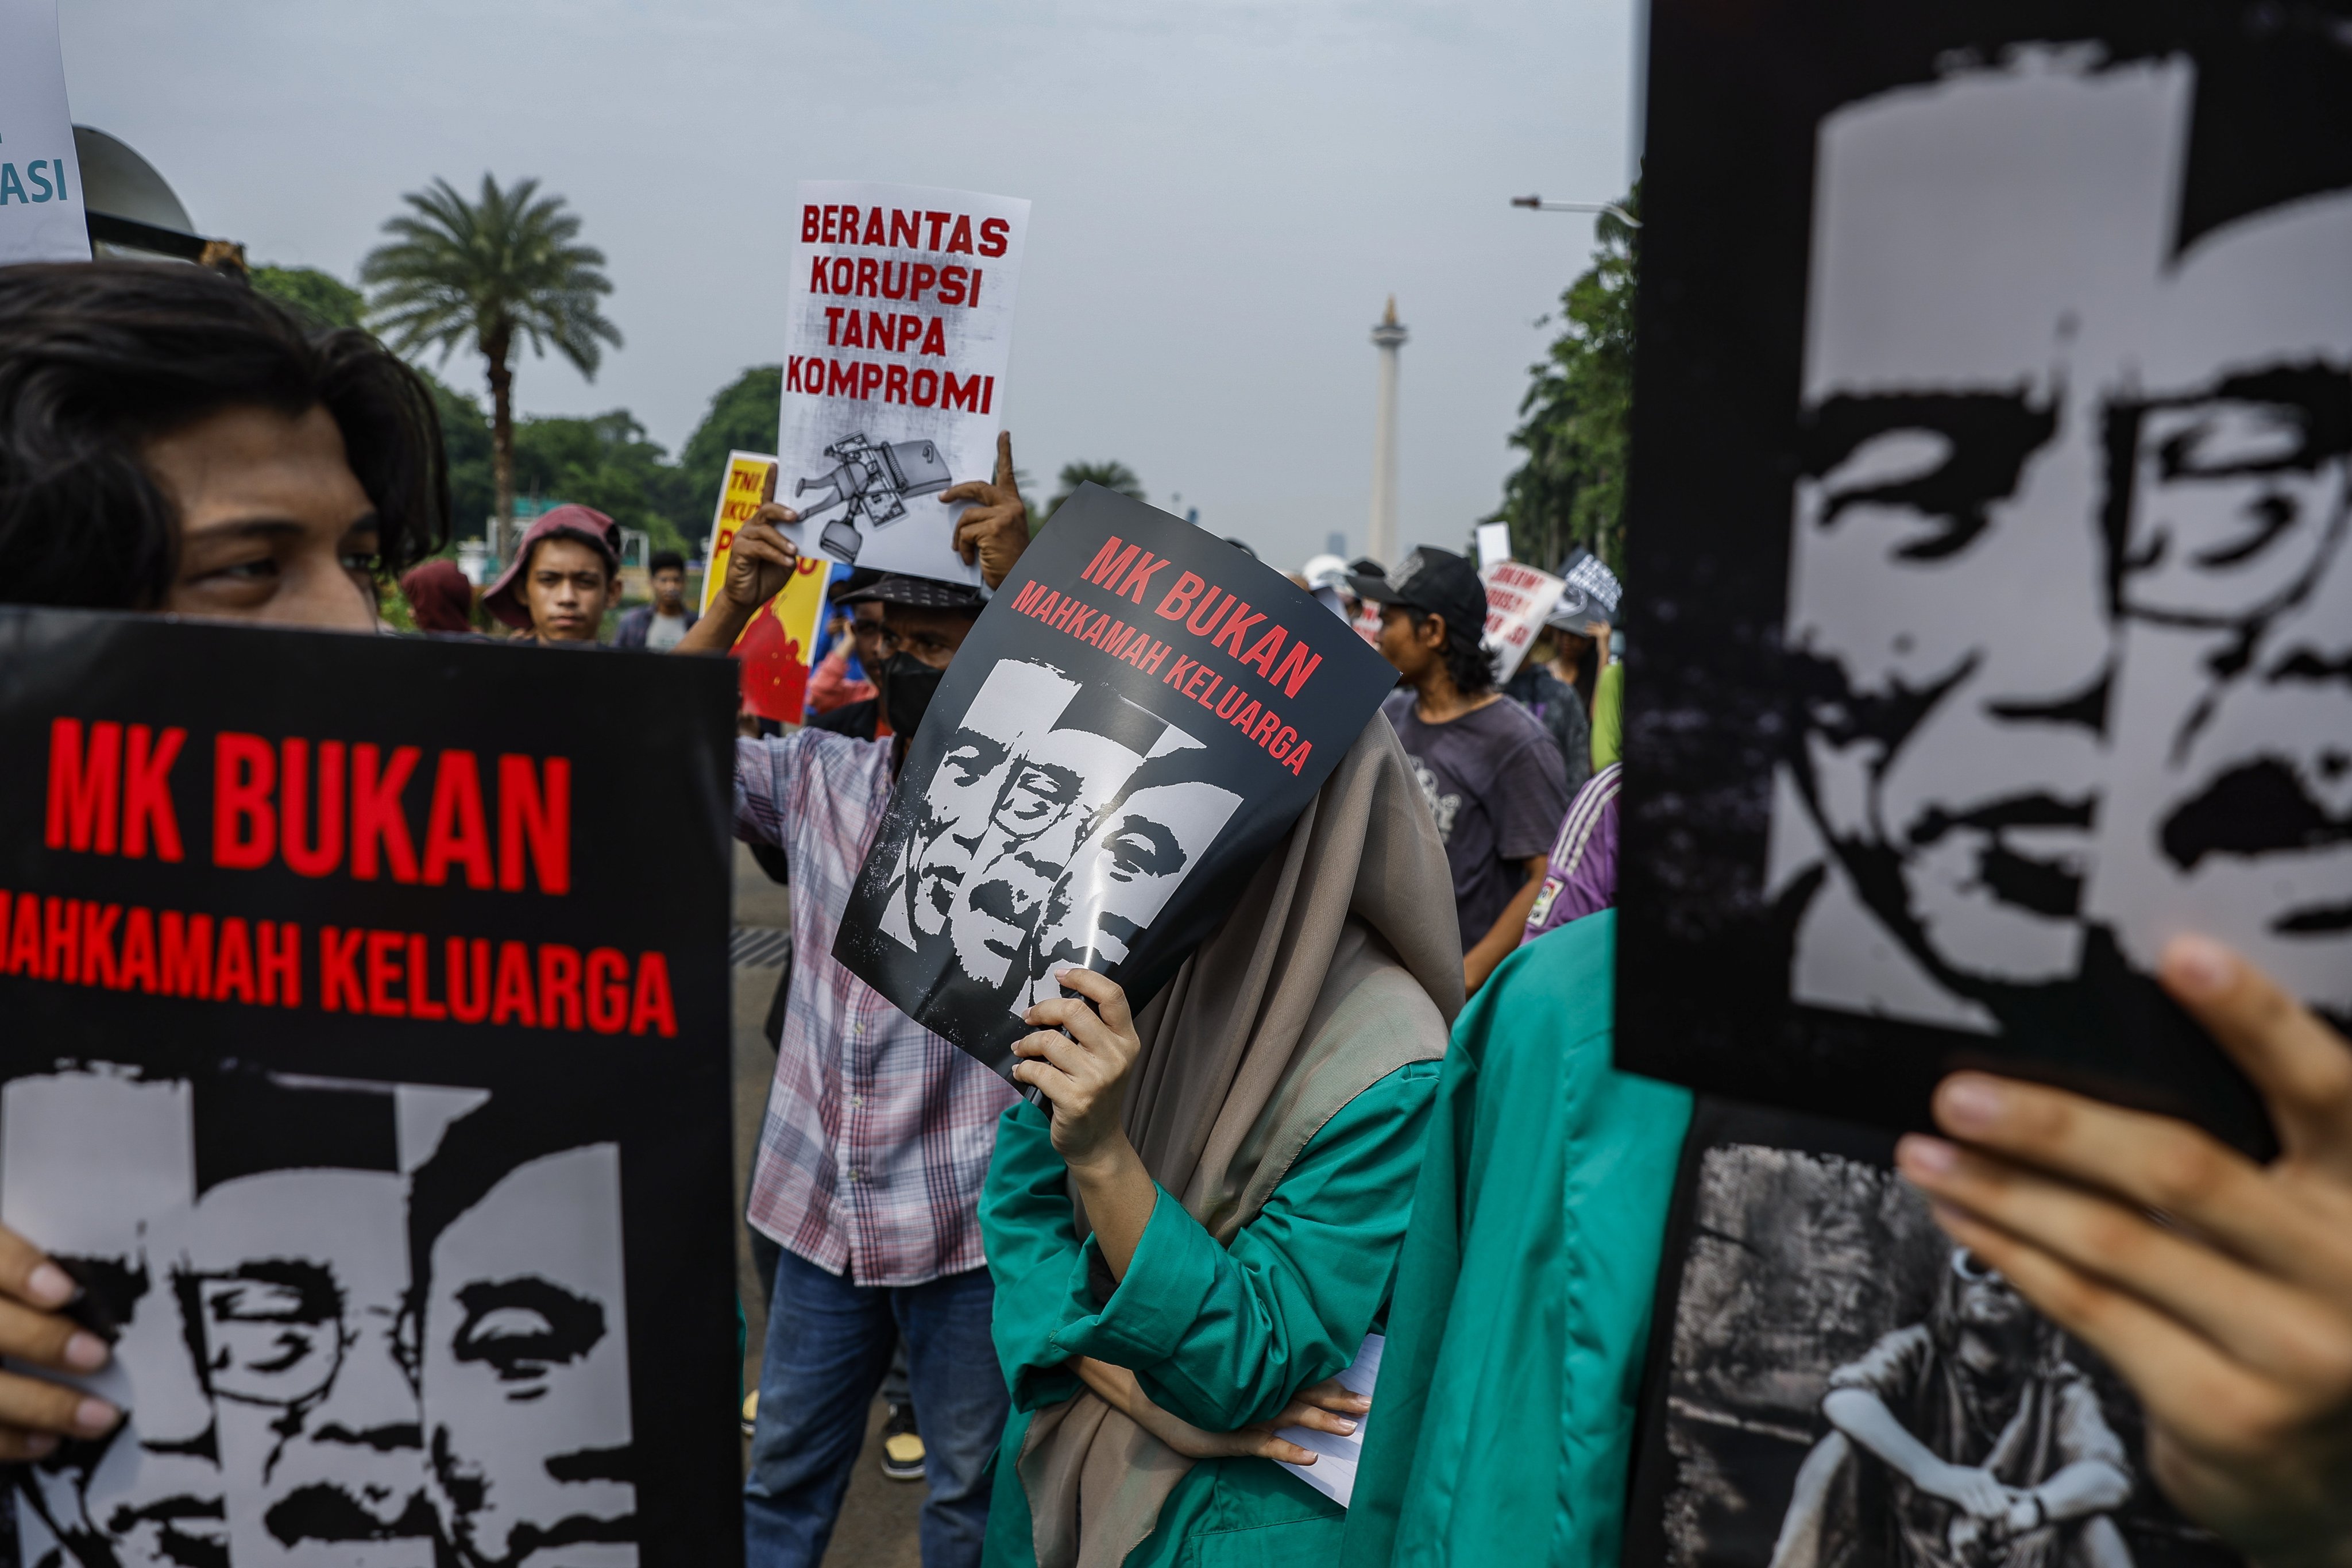 Protesters hold placards with pictures of Indonesian President Joko Widodo, his son Gibran Rakabuming Raka and the former constitutional court chief during a rally against political dynasties in Jakarta on December 7. Photo: EPA-EFE